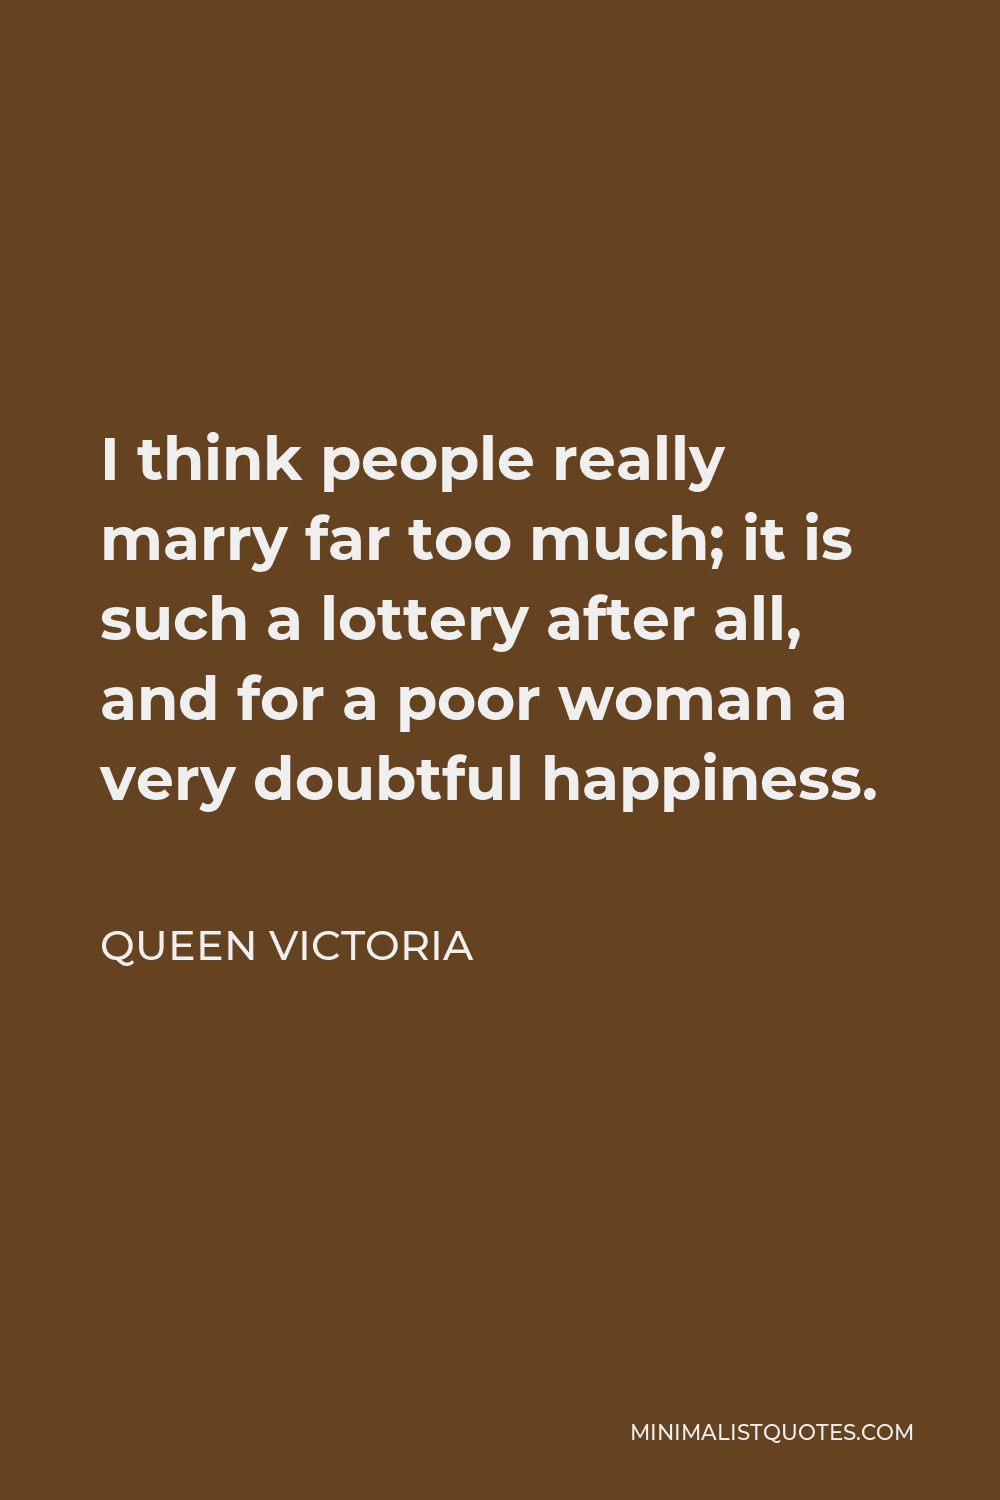 Queen Victoria Quote - I think people really marry far too much; it is such a lottery after all, and for a poor woman a very doubtful happiness.